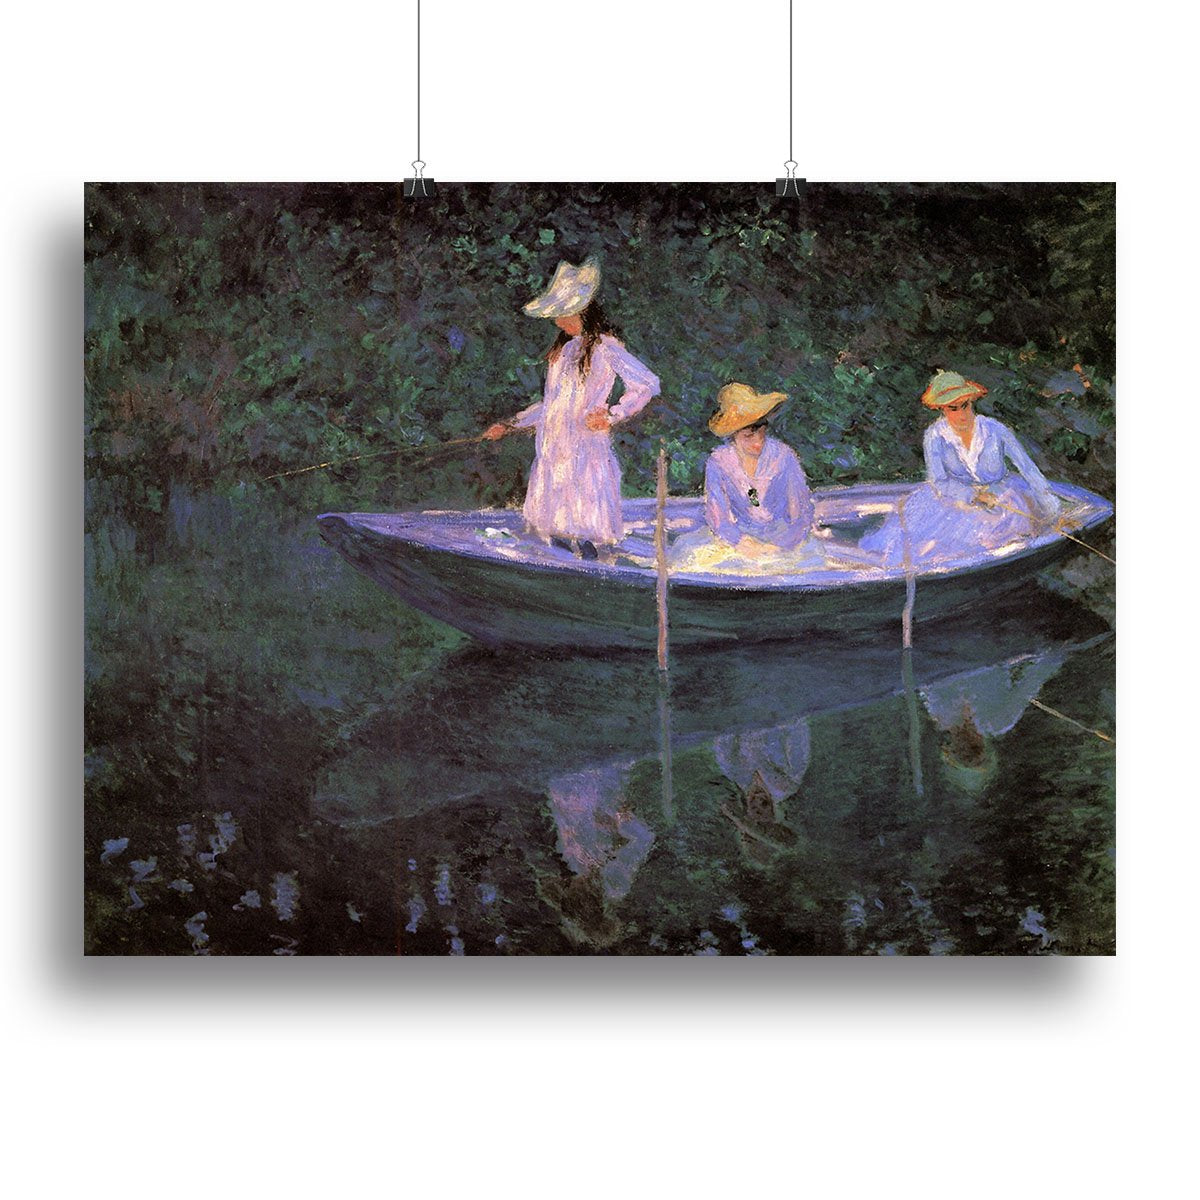 La Barque at Giverny by Monet Canvas Print or Poster